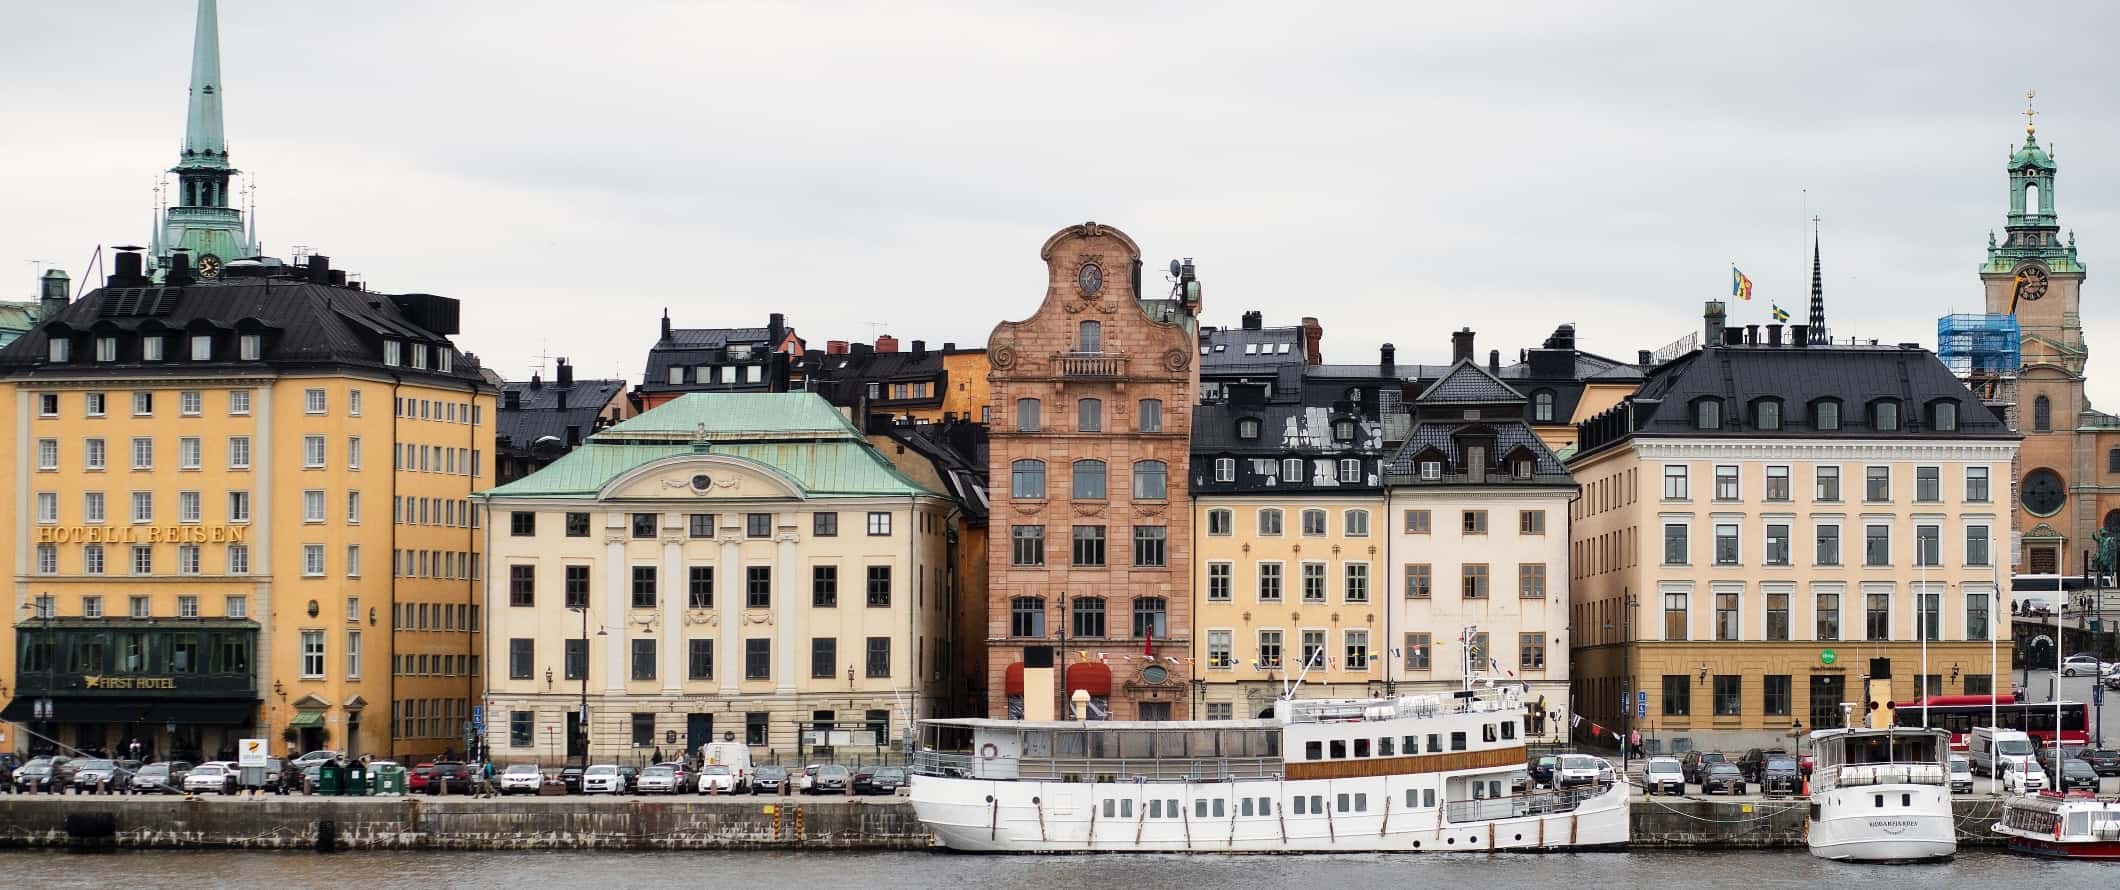 Beige-colored buildings lining the waterfront of Stockholm, Sweden